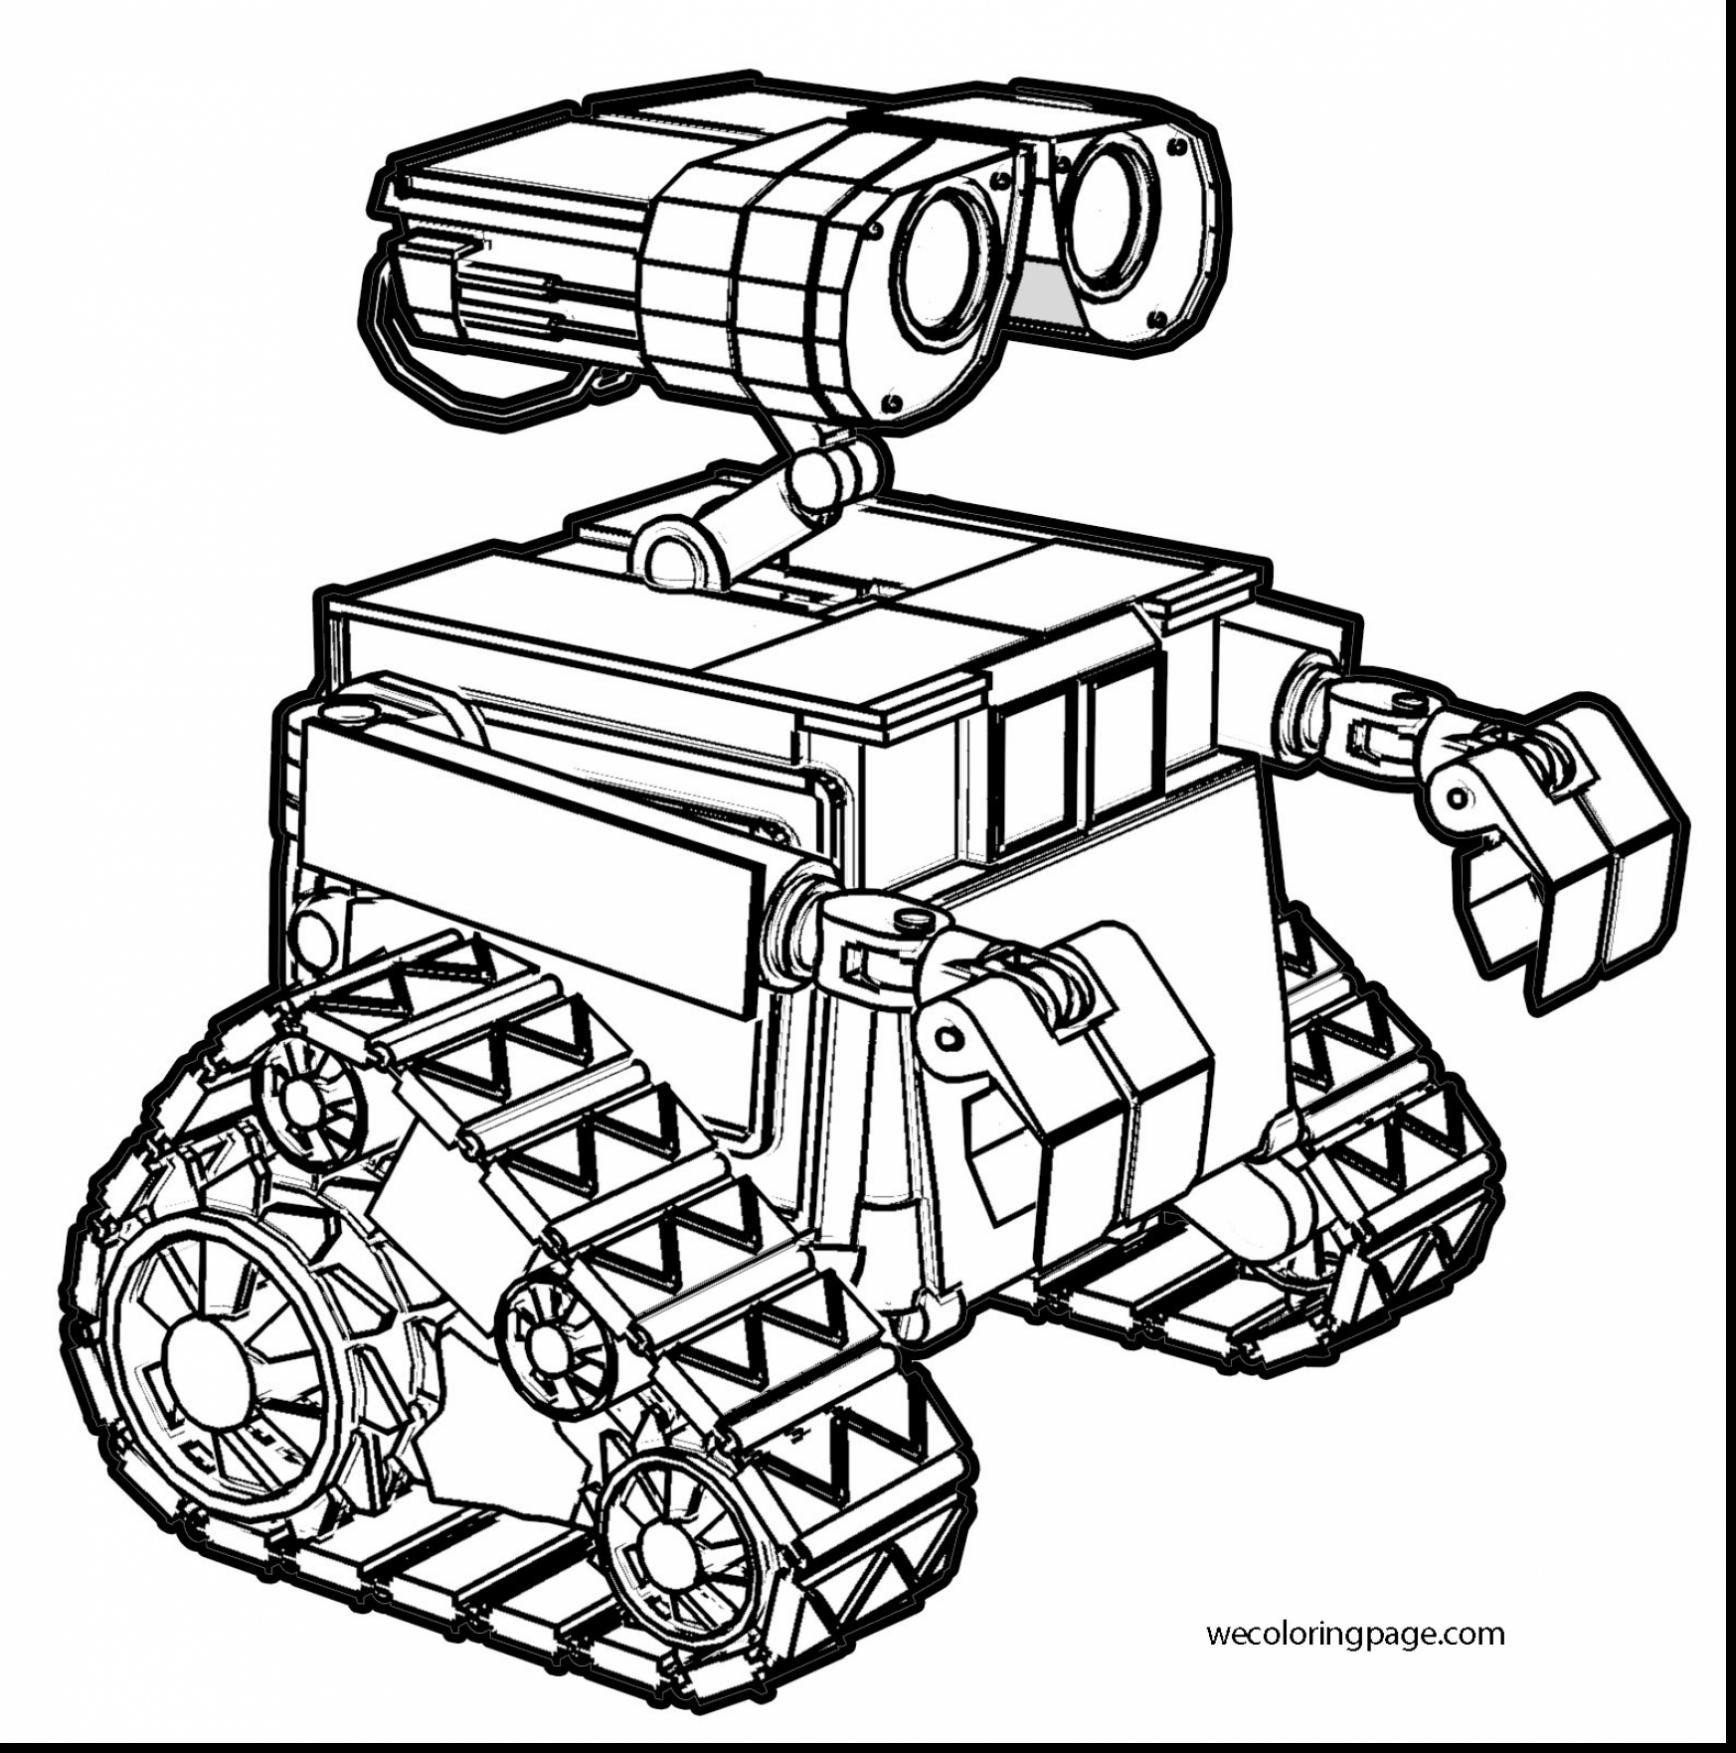 Lego Robot Coloring Pages at GetColorings.com | Free printable